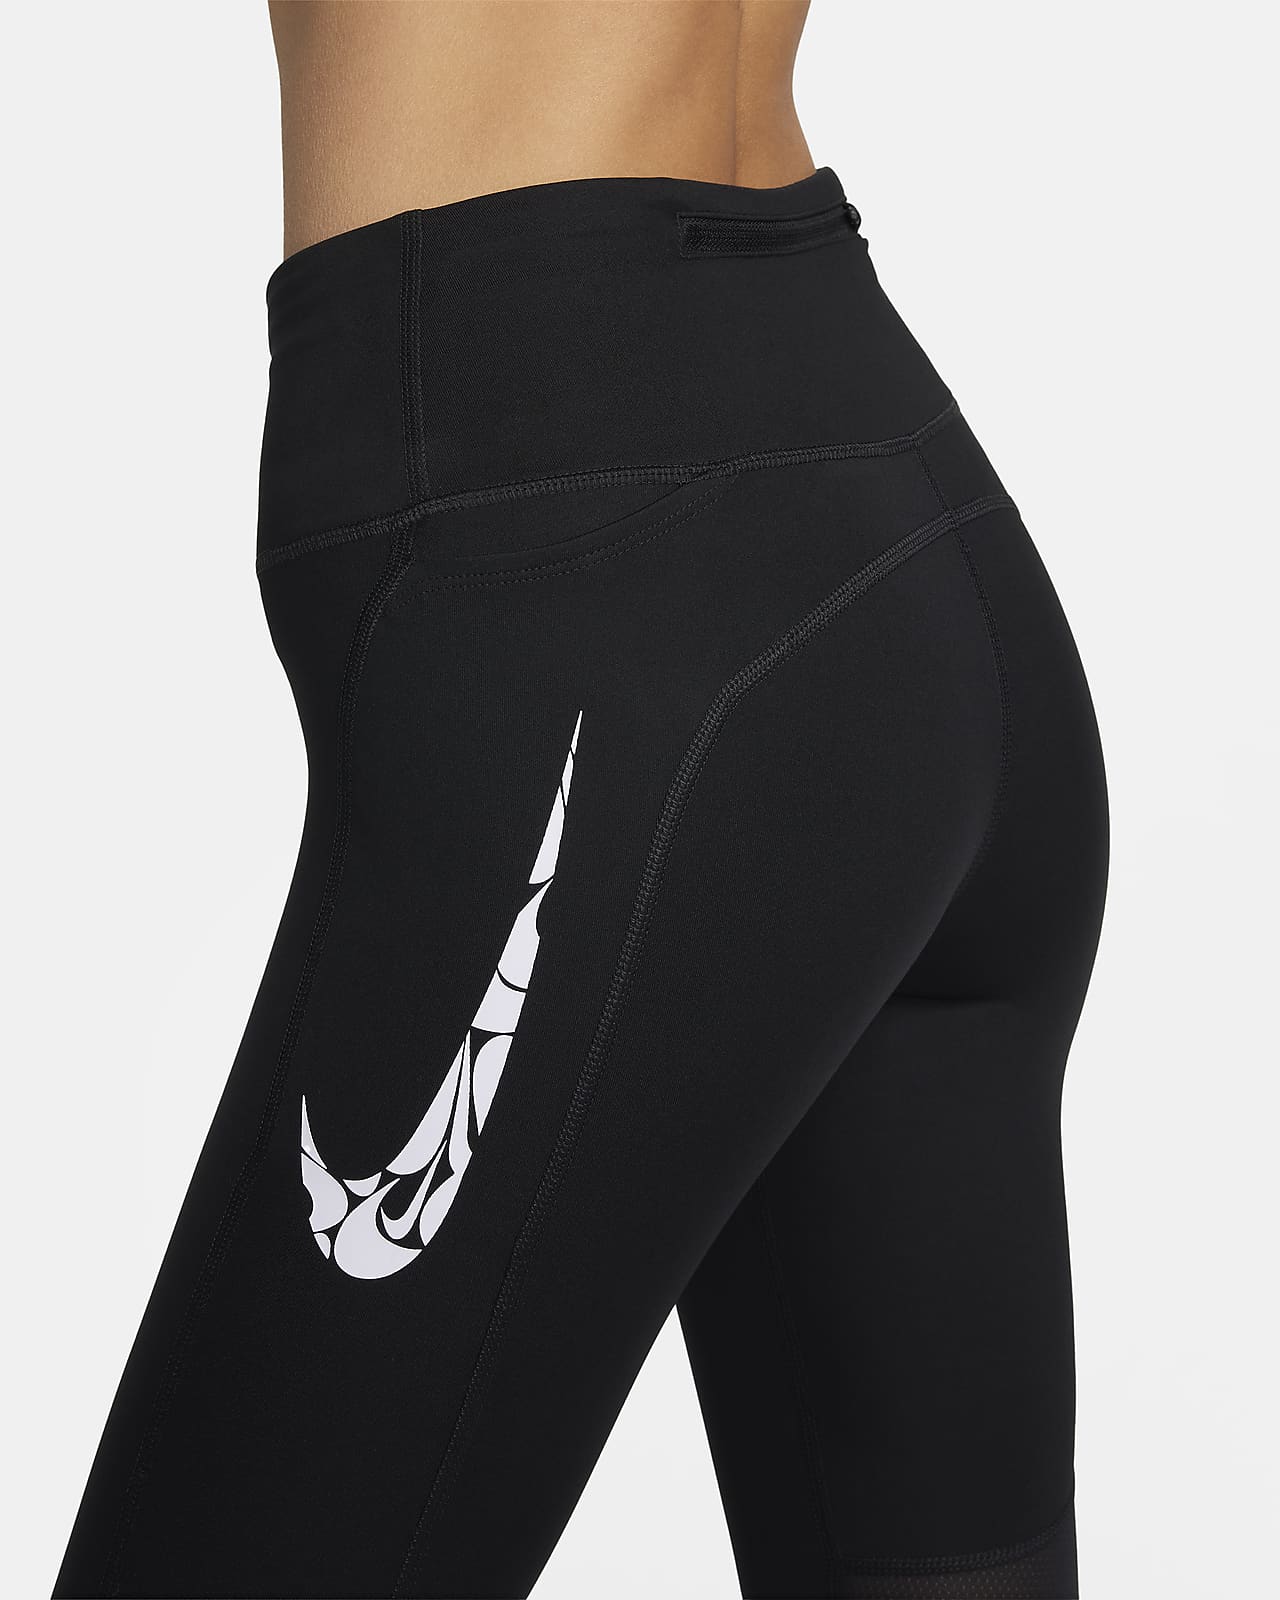 Nike Fast Women's Mid-Rise 7/8 Running Leggings with Pockets (Plus Size).  Nike IL